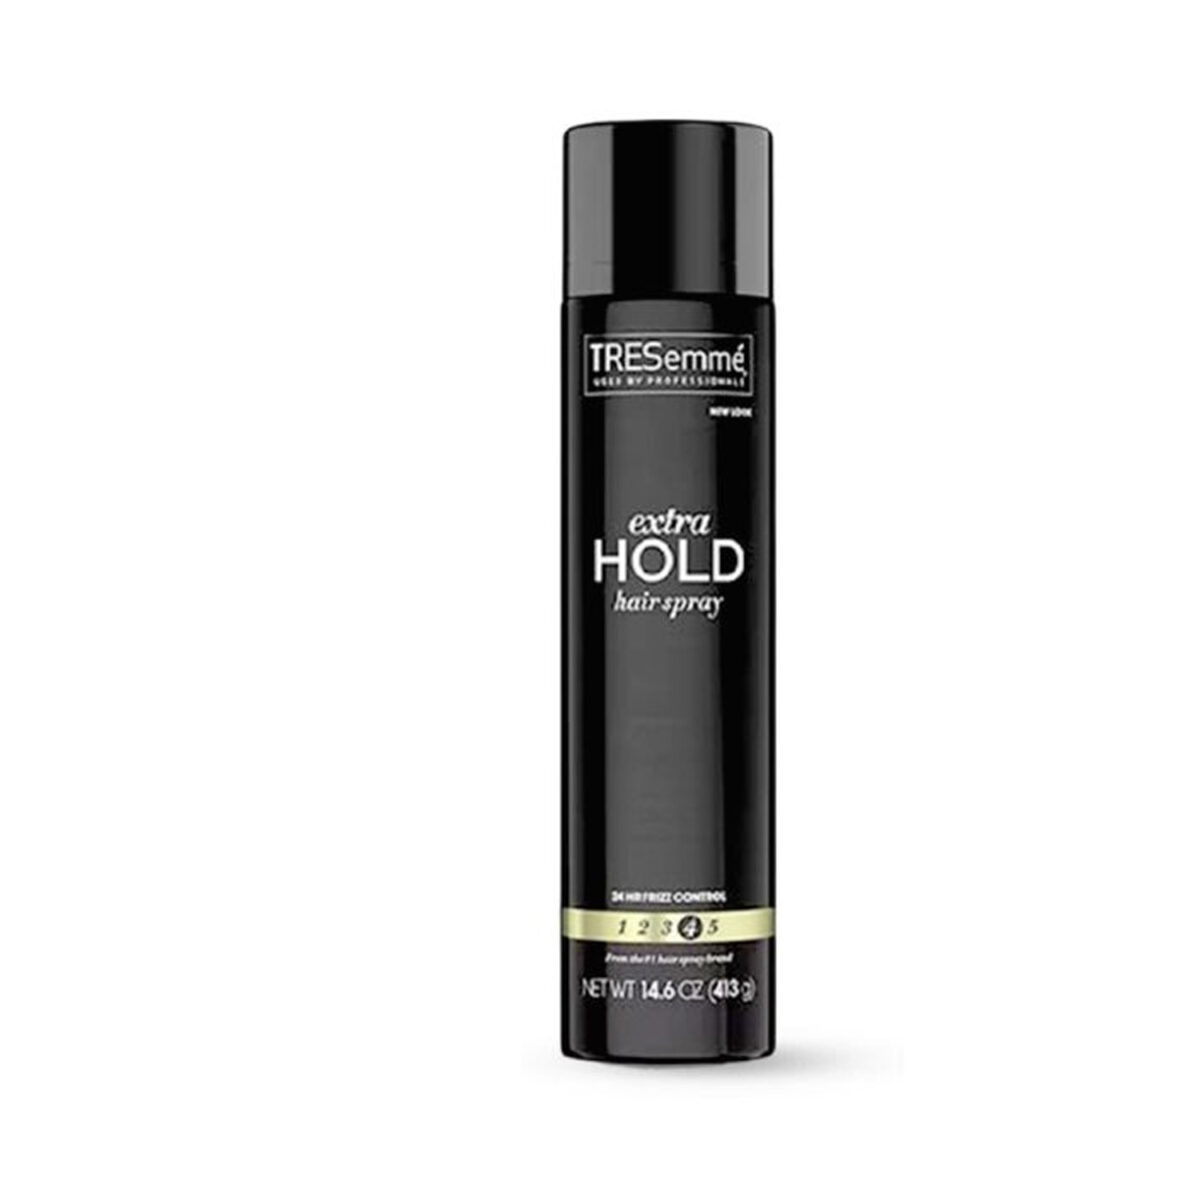 TRESemme Extra Hold Hairspray Extra Hold (413g)